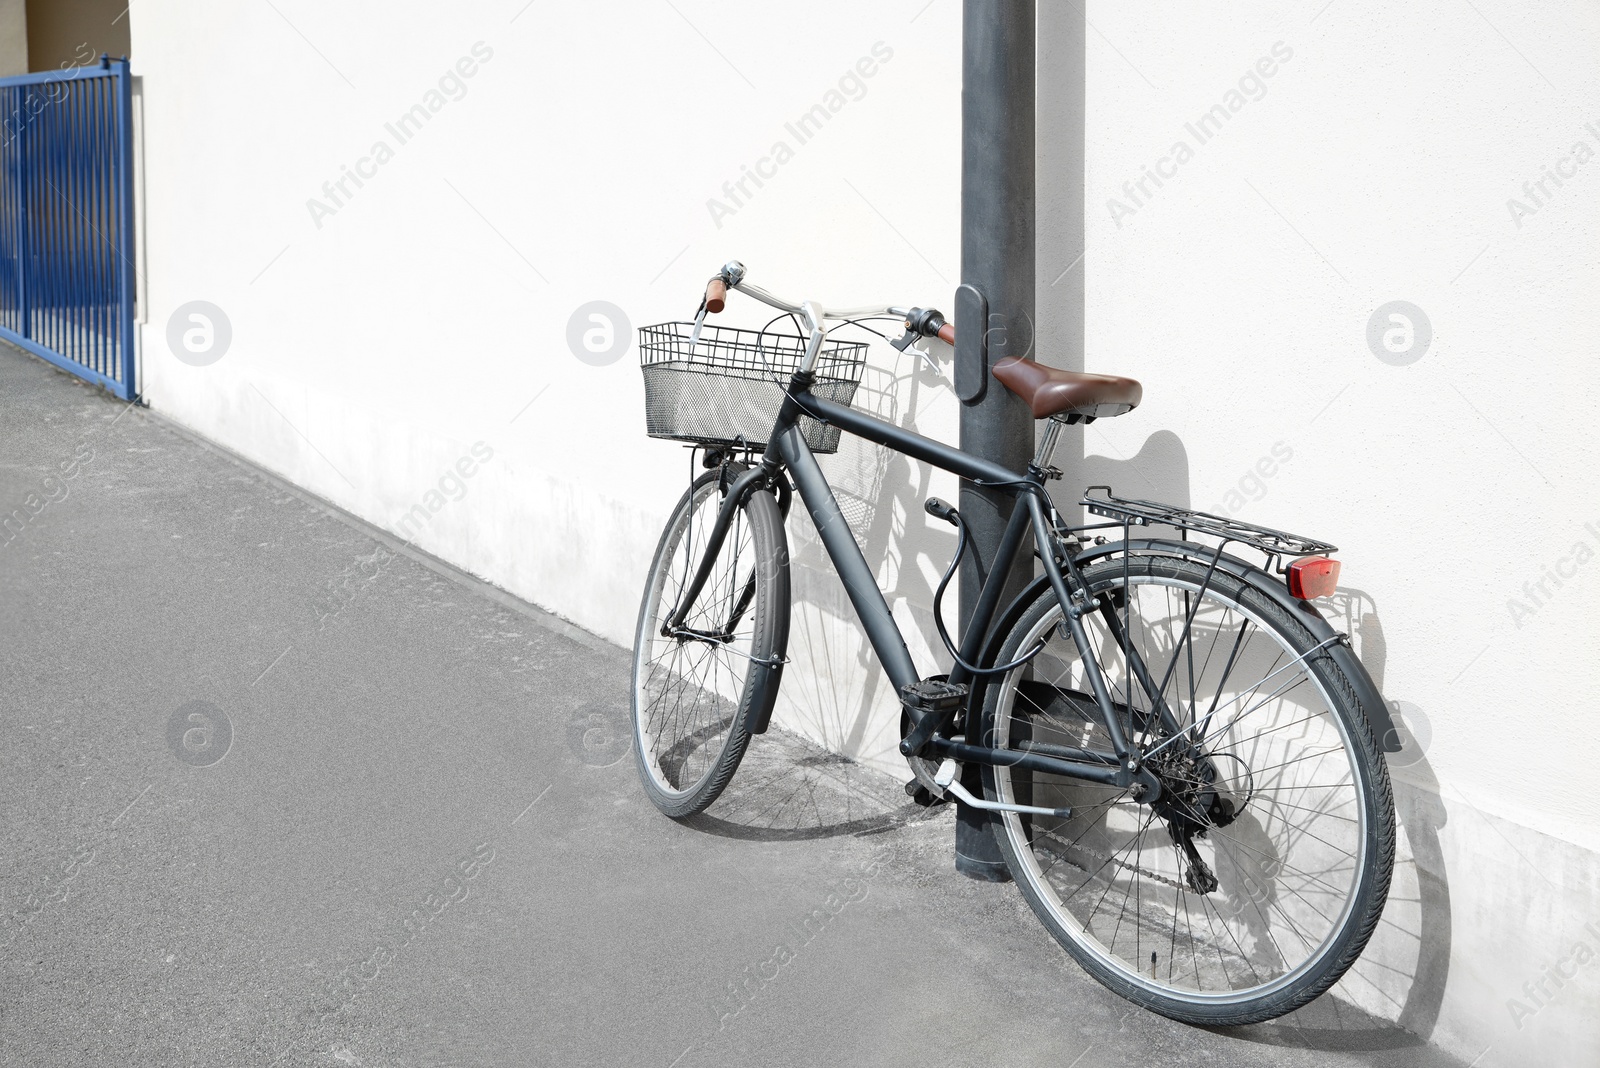 Photo of Vintage bicycle with basket locked to street post outdoors